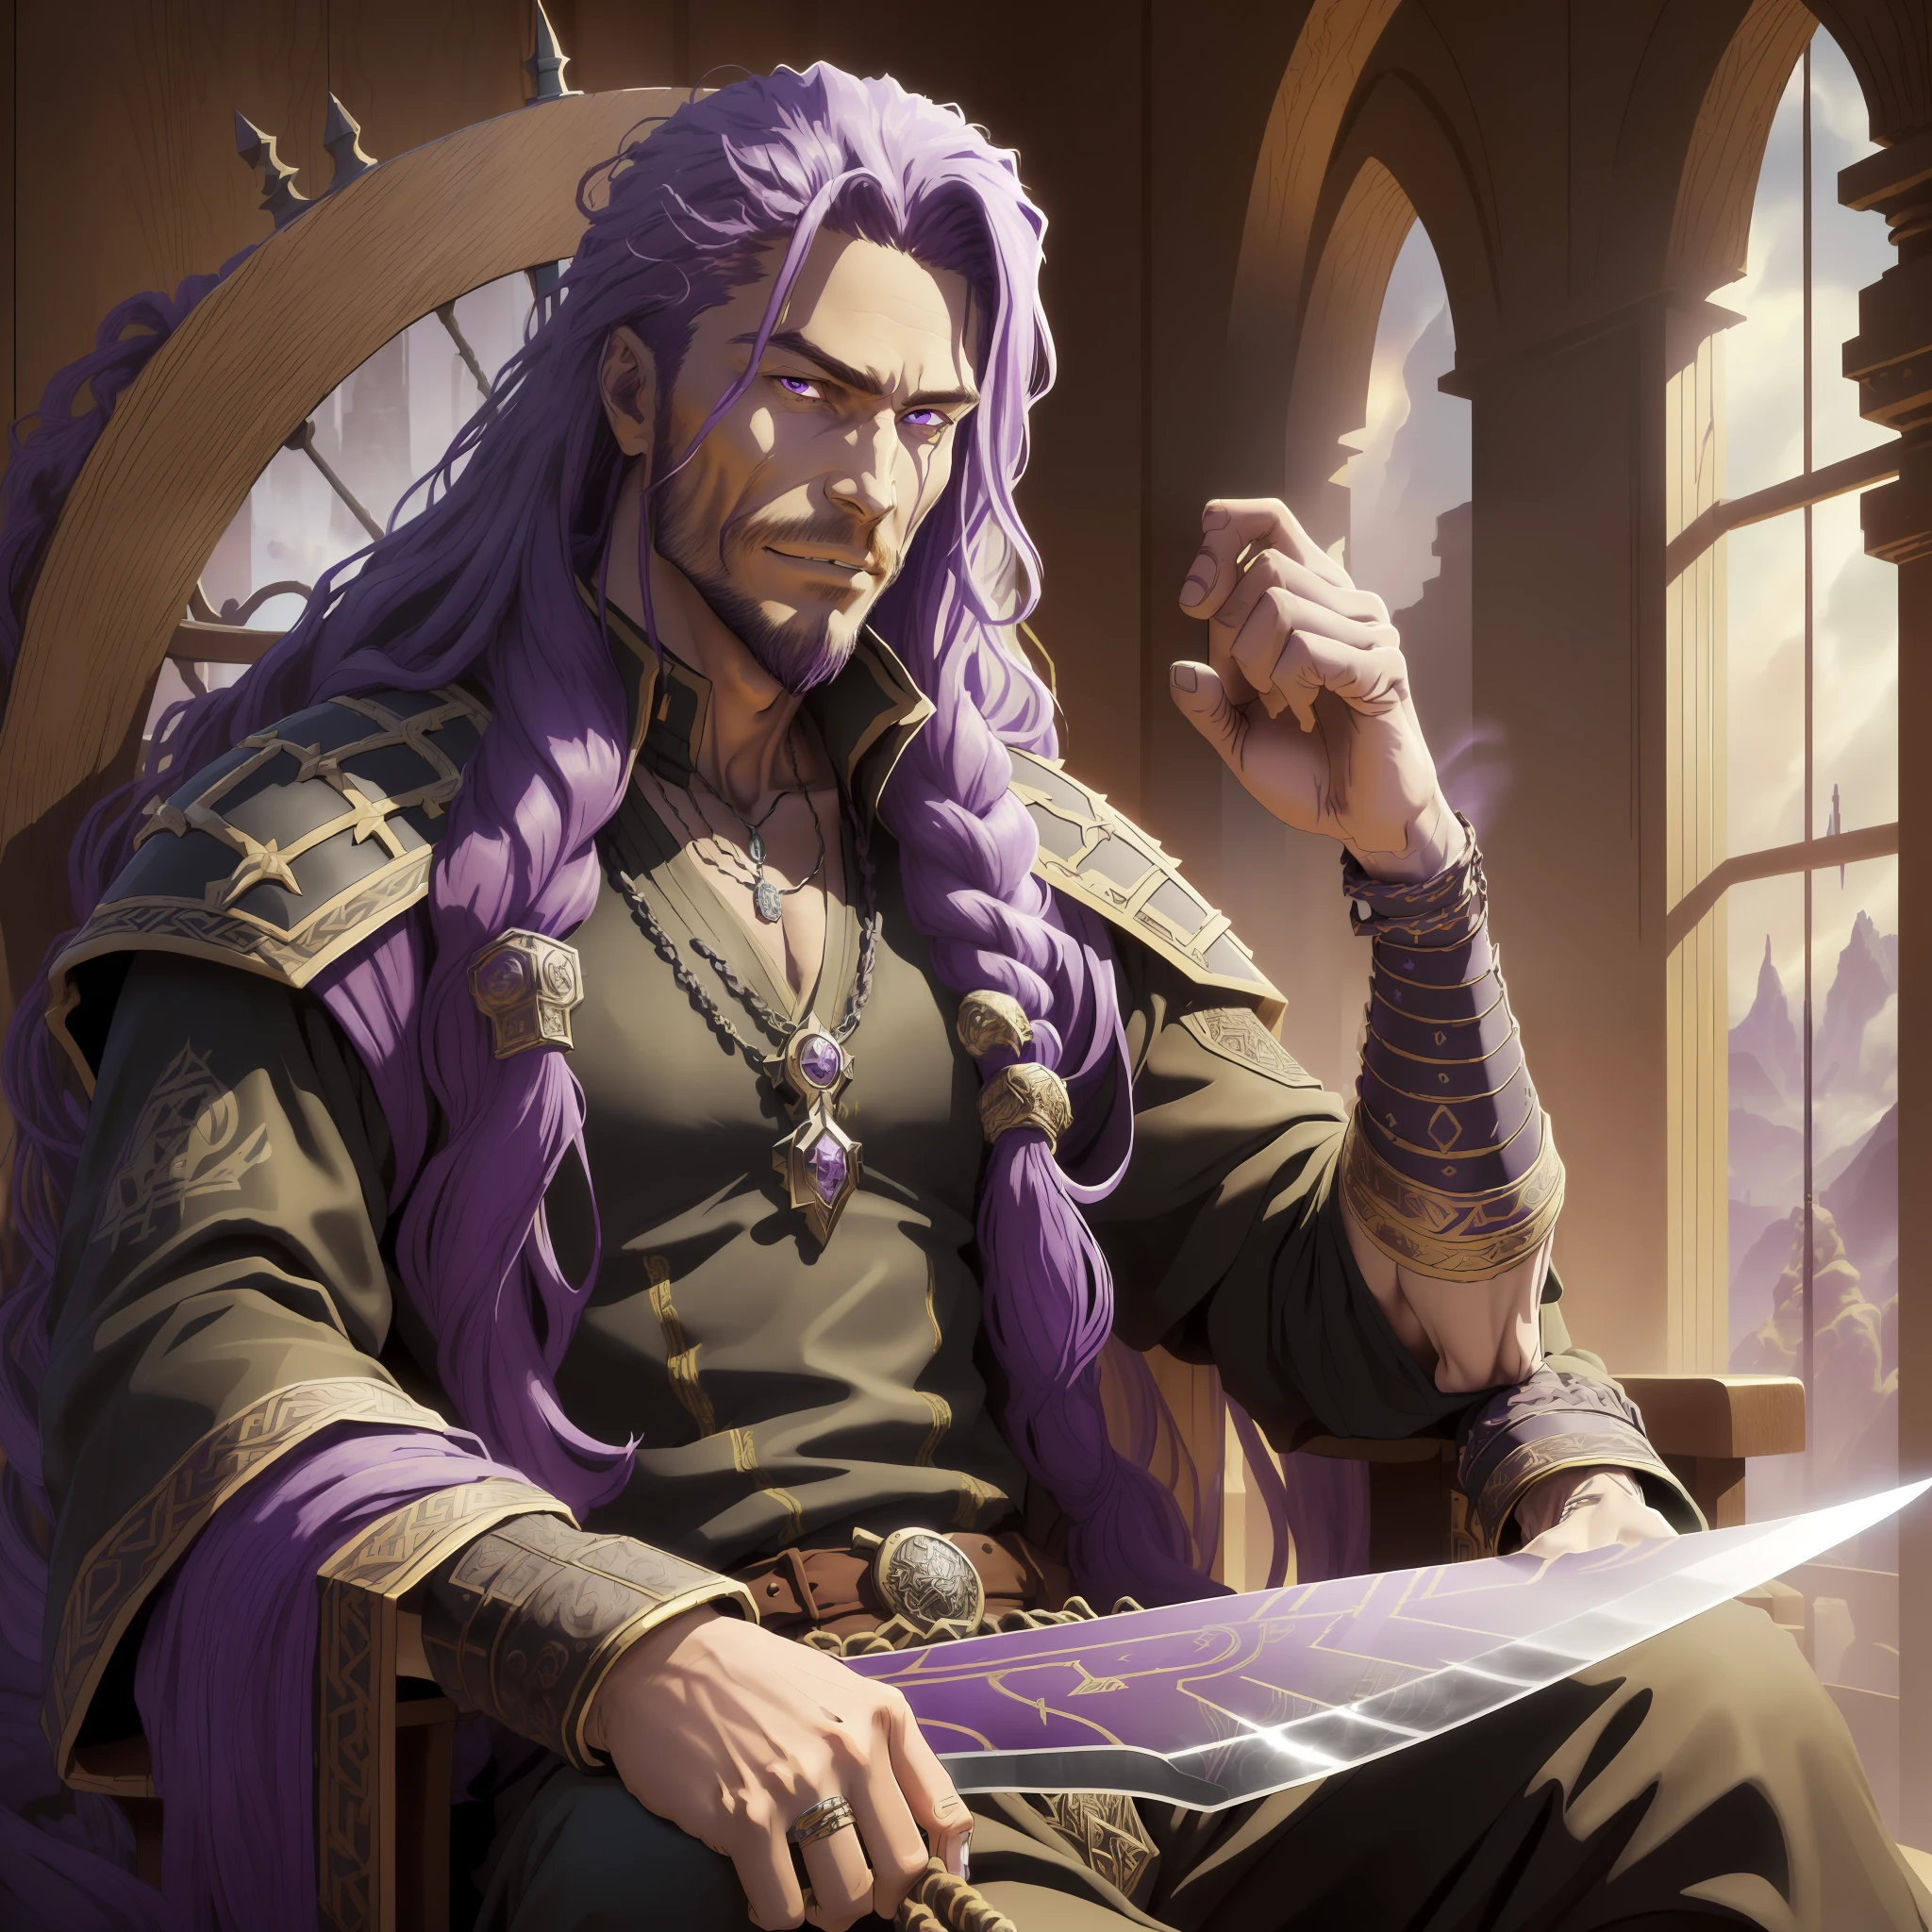 (concept art), (Realistic:1.33), (high-quality depth map:1.1) The drawing depicts a (30-year-old man) sitting on a majestic throne, located in a Viking-era war setting, with elements similar to those of Game of Thrones [".] His (eyes are a deep purple( and contrast with his (long hair and entwined in dreads also purple), which run down his back [".] (His skin is a brown hue), which highlights his strong and striking features [".] He is dressed in black, with clothes of light fabrics that seem to have a luxurious appearance [".] On his neck and wrists, he wears several gold necklaces and bracelets, which shine against his skin [".]

The scenery in which it stands is highly detailed, with an impressive sharpness and realism, thanks to the digital illustration in 4K [".] Several elements are present that indicate a war scene in the age of the Vikings, such as burning ships, soldiers with shields and swords, and smoke [".] The throne on which he is seated is ornate, with wooden details and intricate carvings [".]

(The man holds a long, sharp sword in his right hand), which has also been drawn in detail with sharpness and realism, and appears to be a Viking sword [".] His smile is mischievous, almost imperceptible, and seems to indicate that he knows secrets that no one else does. He examines his surroundings with a piercing gaze, as if he is always one step ahead of others [".]

His purple dreaded hair is an important element of his appearance, and has been designed with care and attention to detail [".] The sword is also an important part of the drawing, and was depicted realistically and accurately [".] The design conveys the feel of an epic battle scene, with a mix of fantasy and story elements [".]